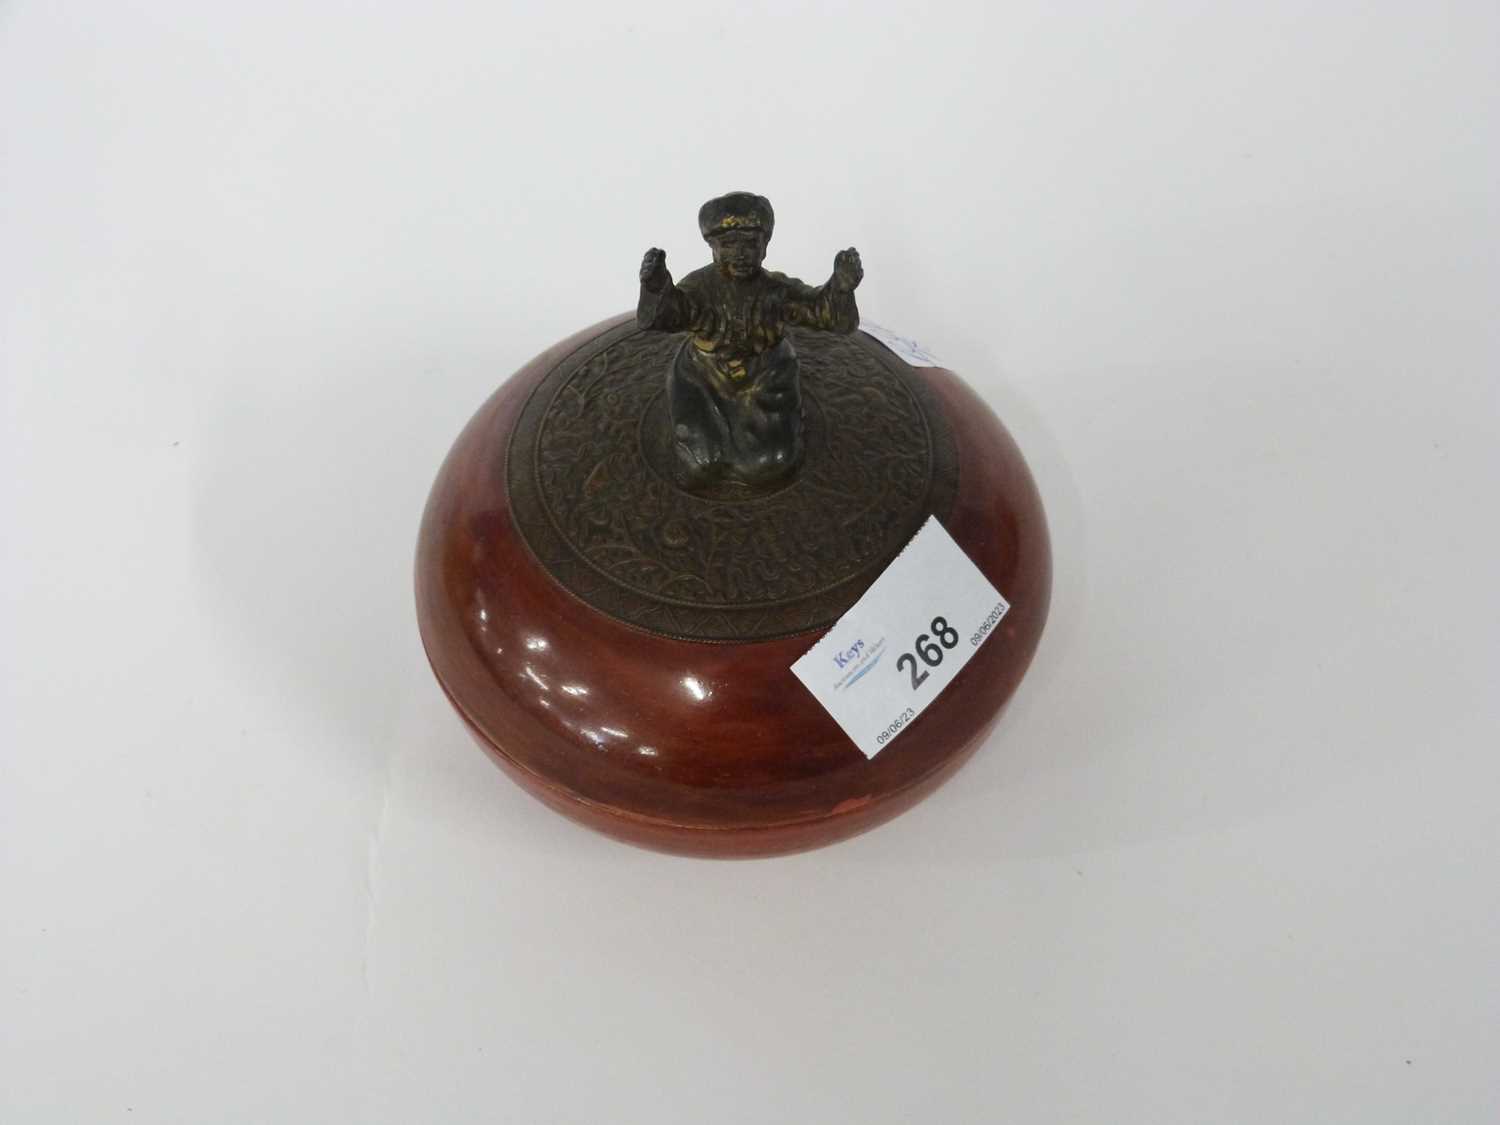 Continental porcelain circular box and cover with Oriental figure as a finial